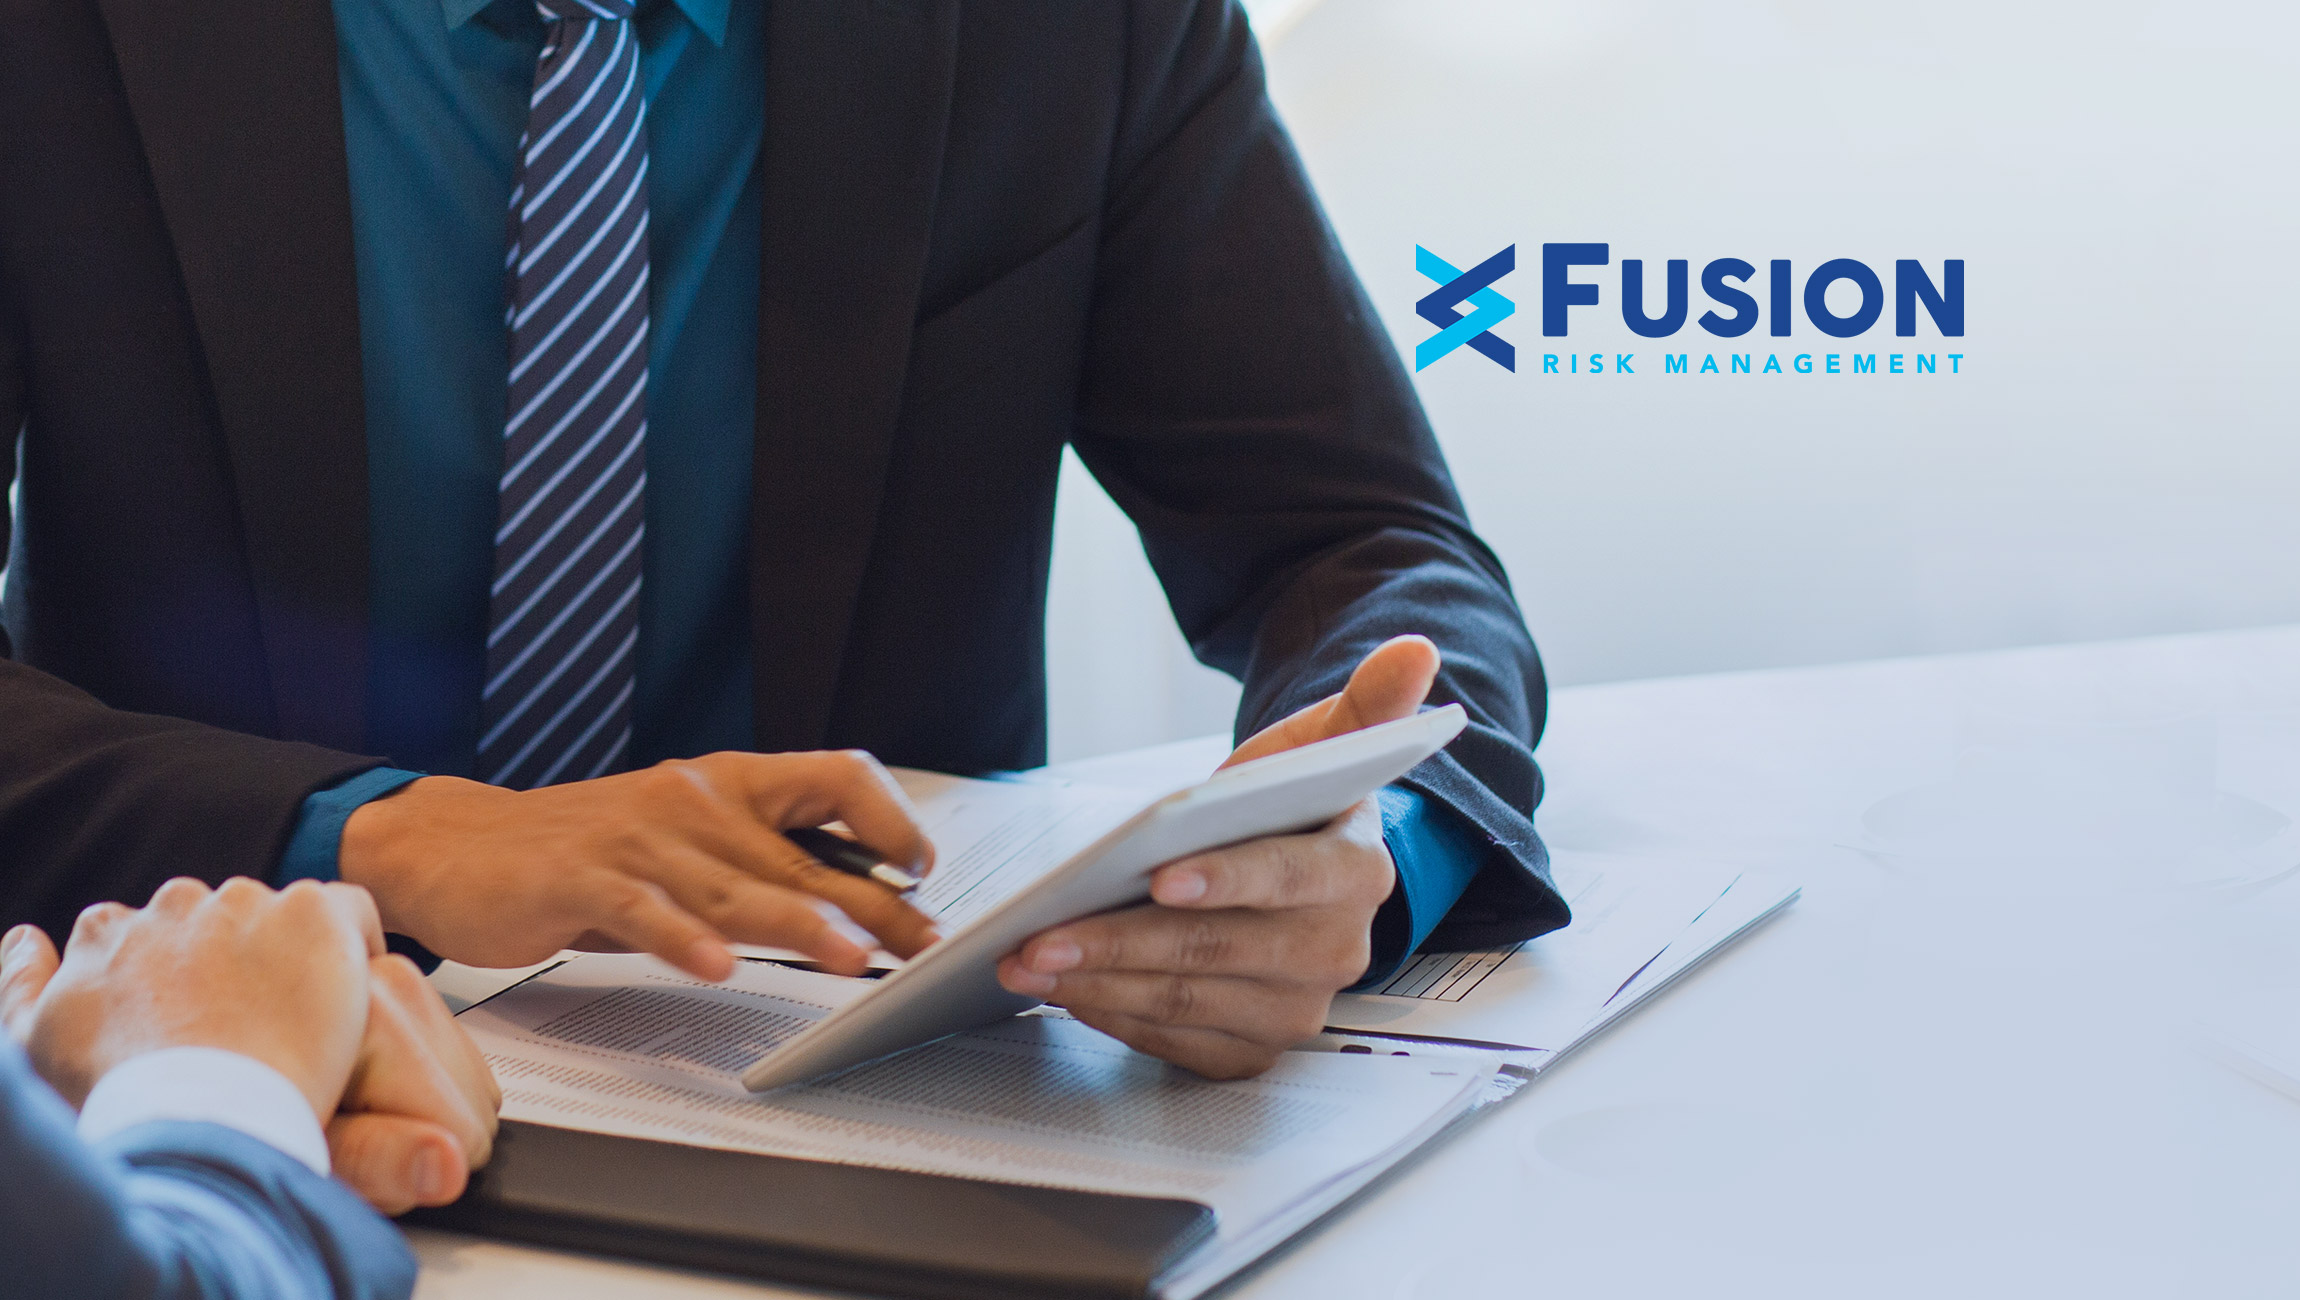 Fusion Risk Management Extends Market Leadership with Global Financial Services Wins in New Era of Operational Resilience